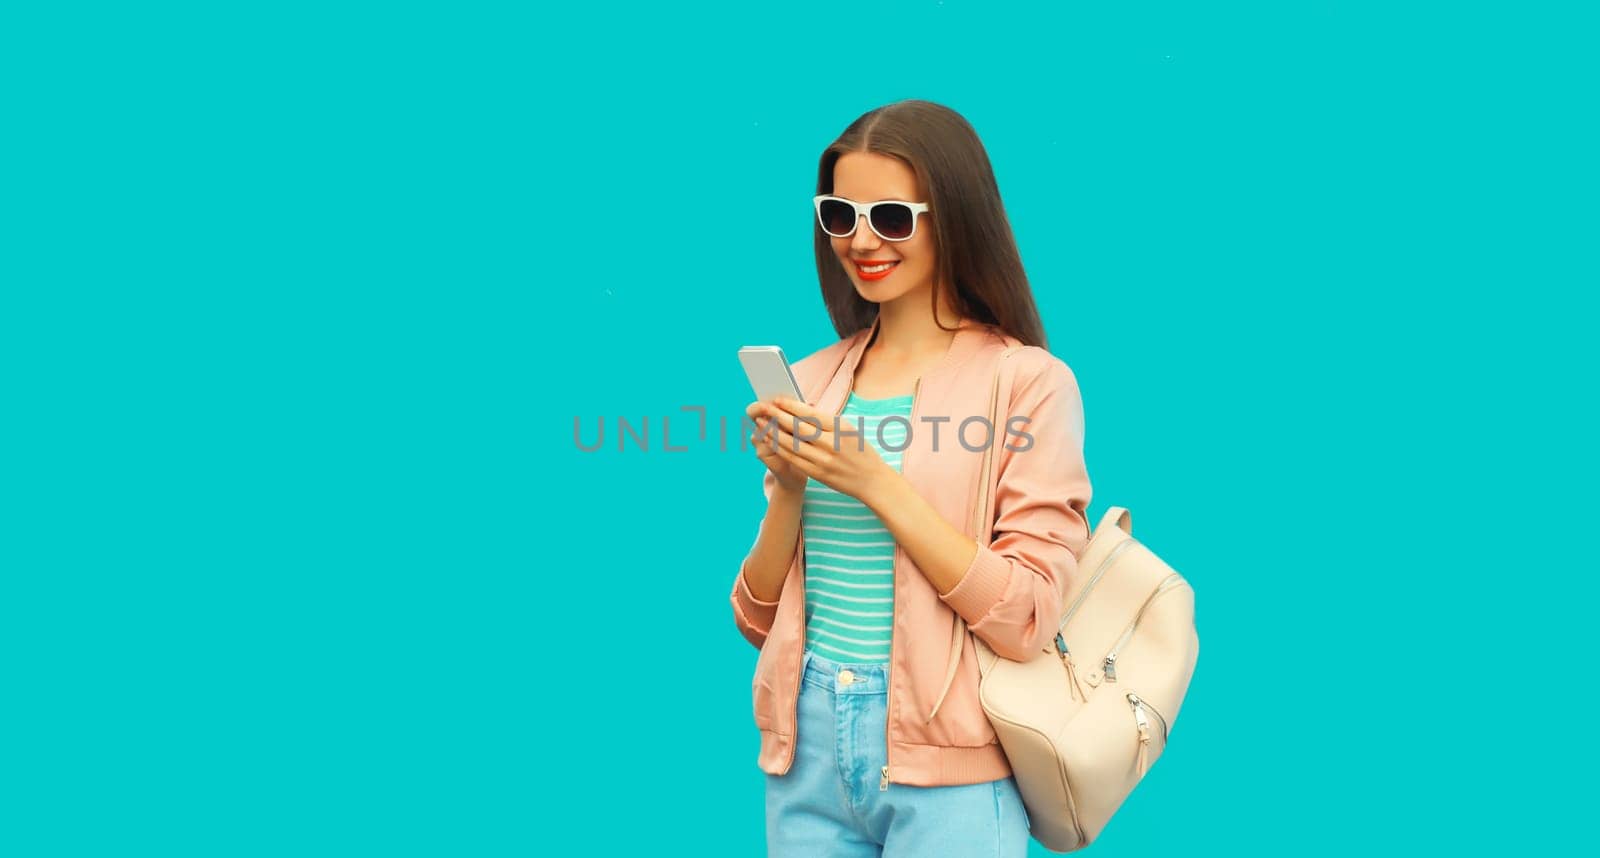 Portrait of smiling young woman with smartphone wearing backpack and sunglasses on blue background